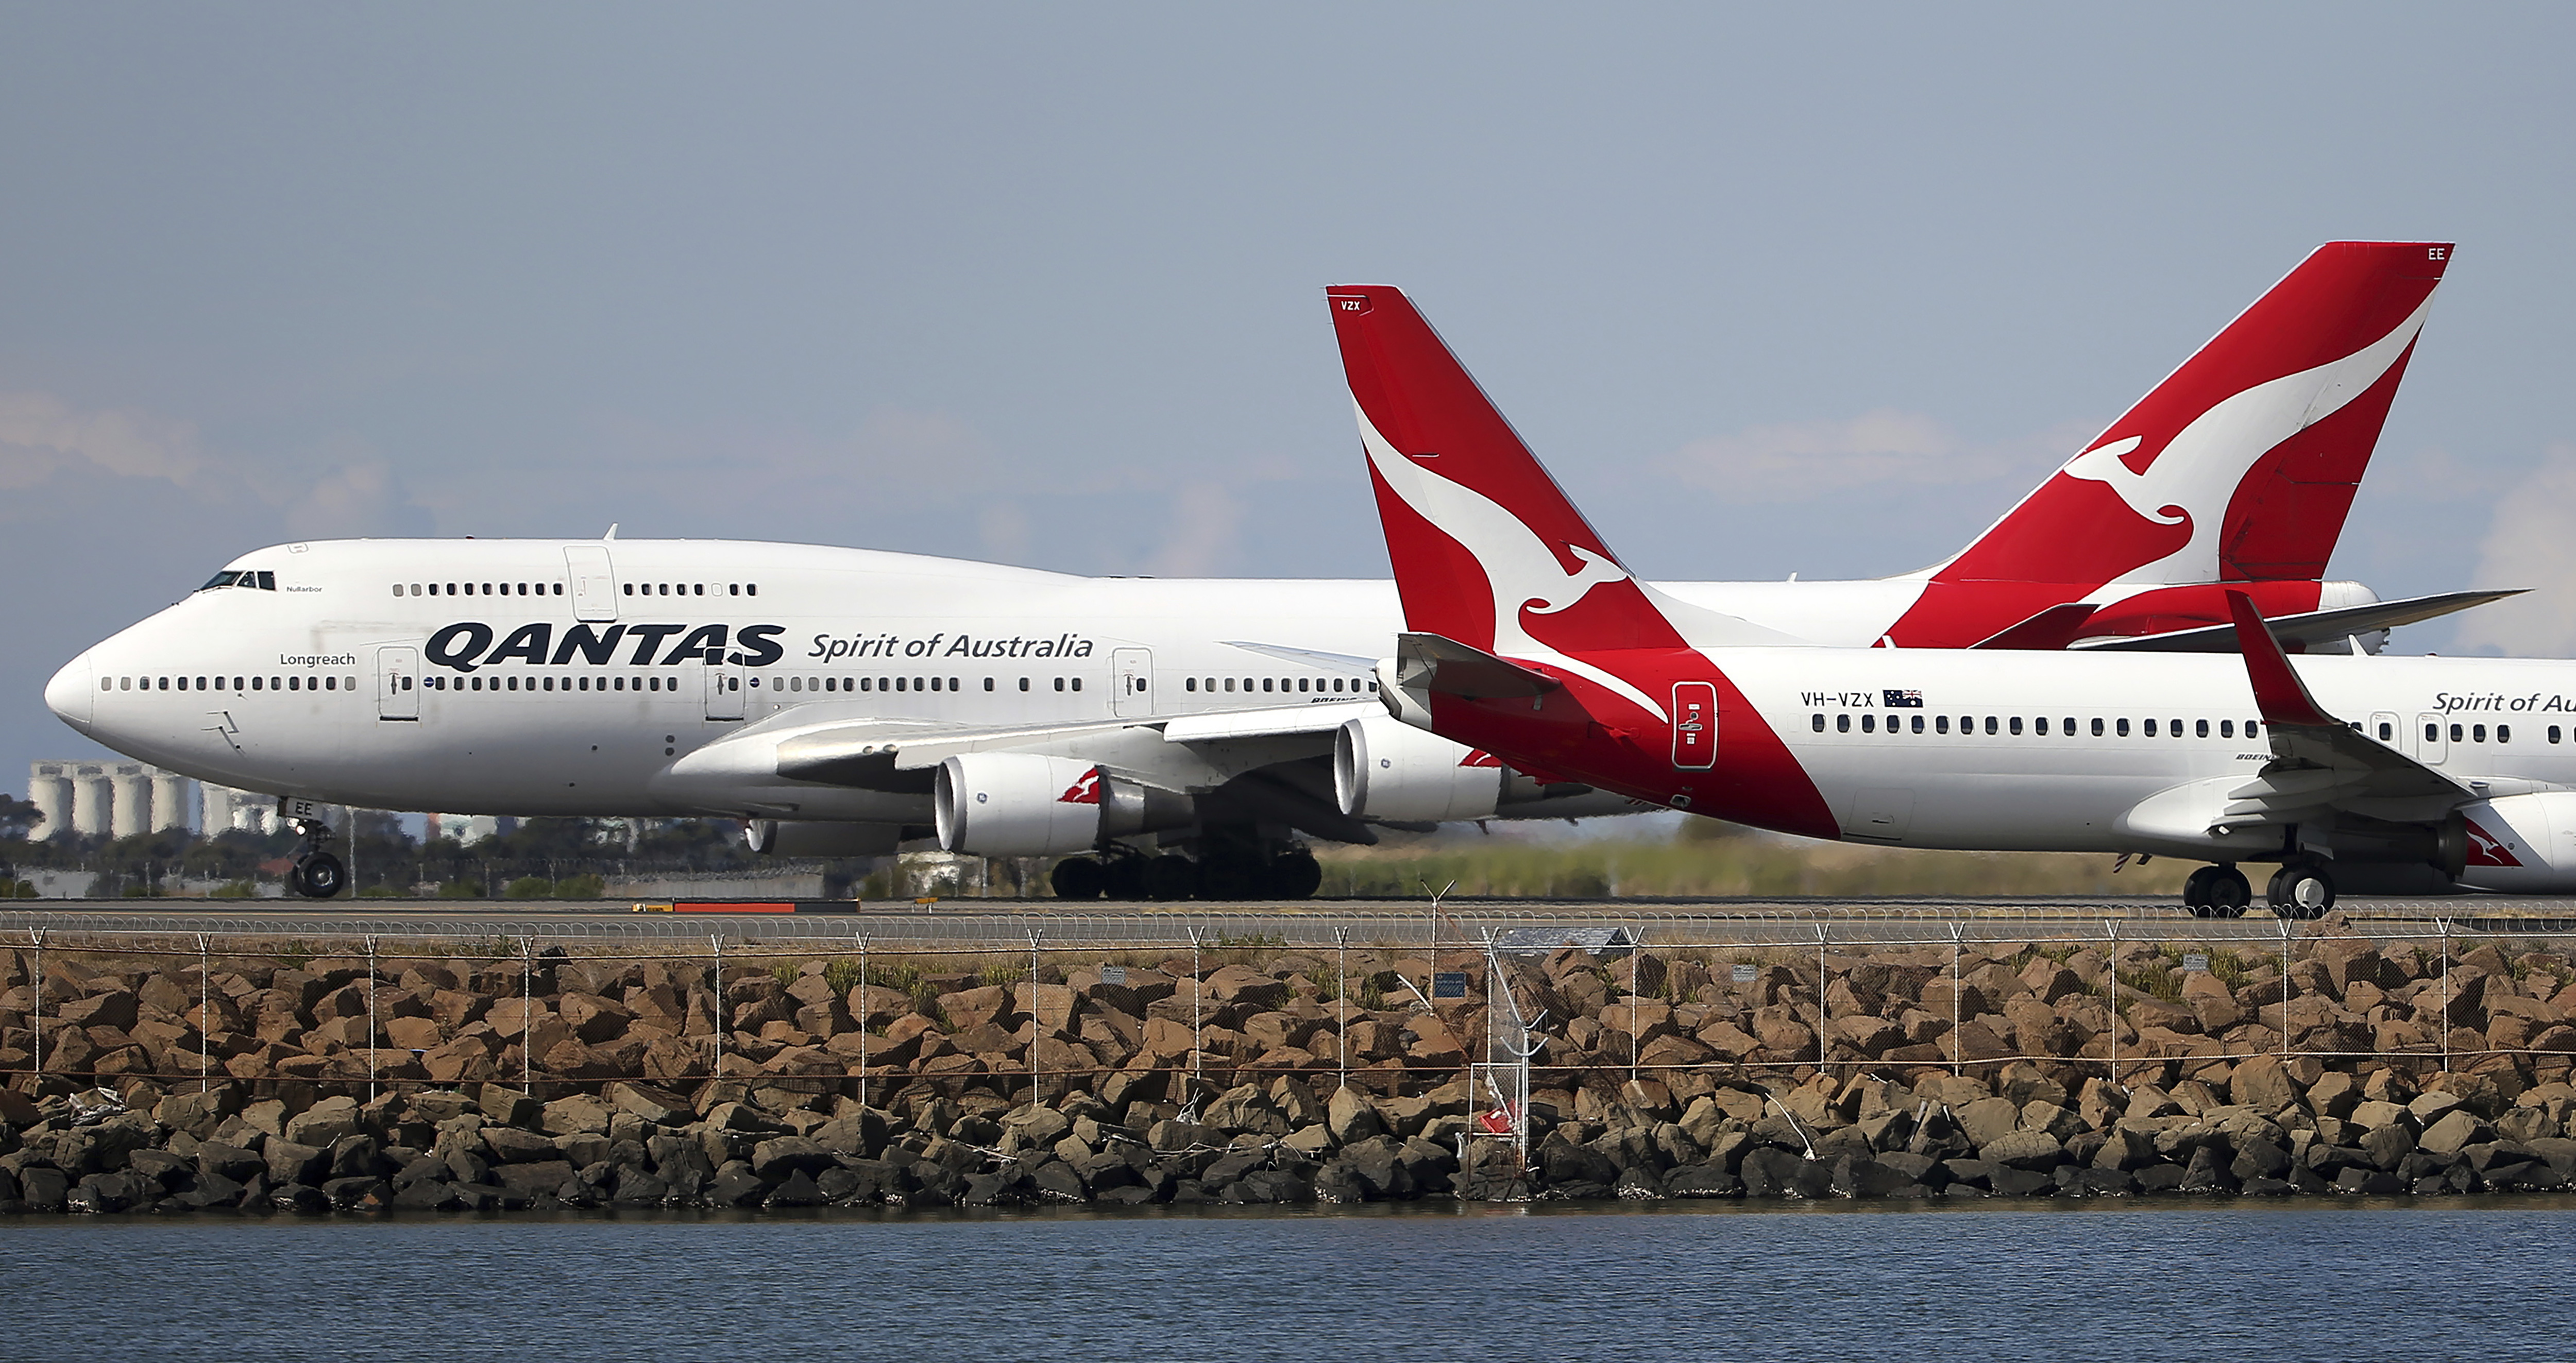 FILE - In this Aug. 20, 2015 file photo, two Qantas planes taxi on the runway at Sydney Airport in Sydney, Australia. Australia's Qantas has completed the first non-stop commercial flight from New York to Sydney Sunday, Oct. 20, 2019, which was used to run a series of tests to assess the effects of ultra-long-haul flights on crew fatigue and passenger jetlag. (AP Photo/Rick Rycroft)